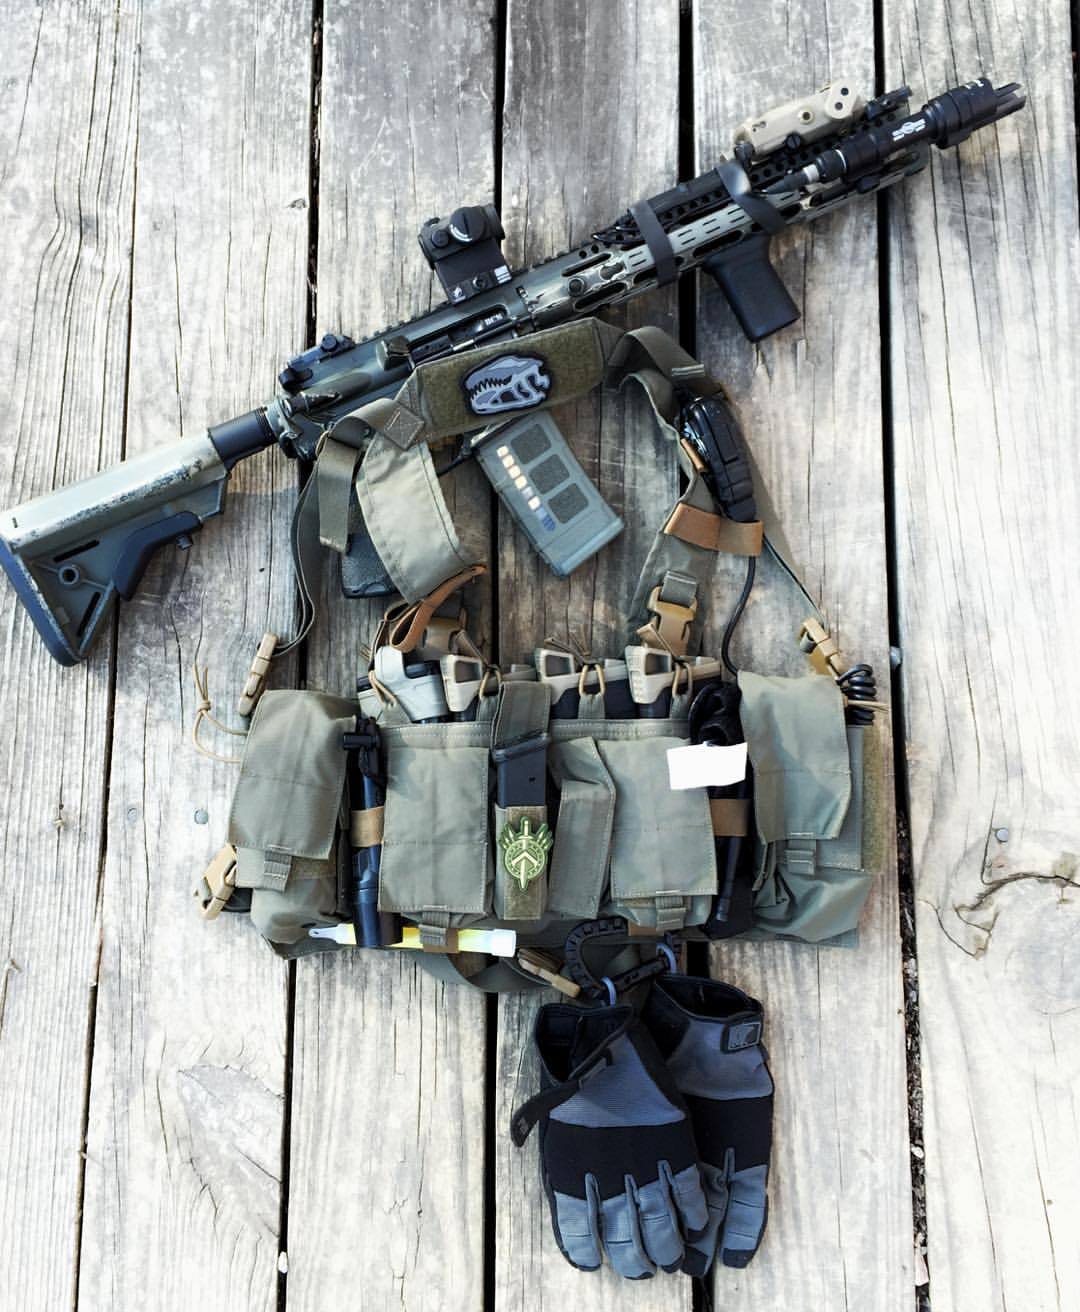 T.REX ARMS — Mayflower/Velocity Systems chest rig all kitted